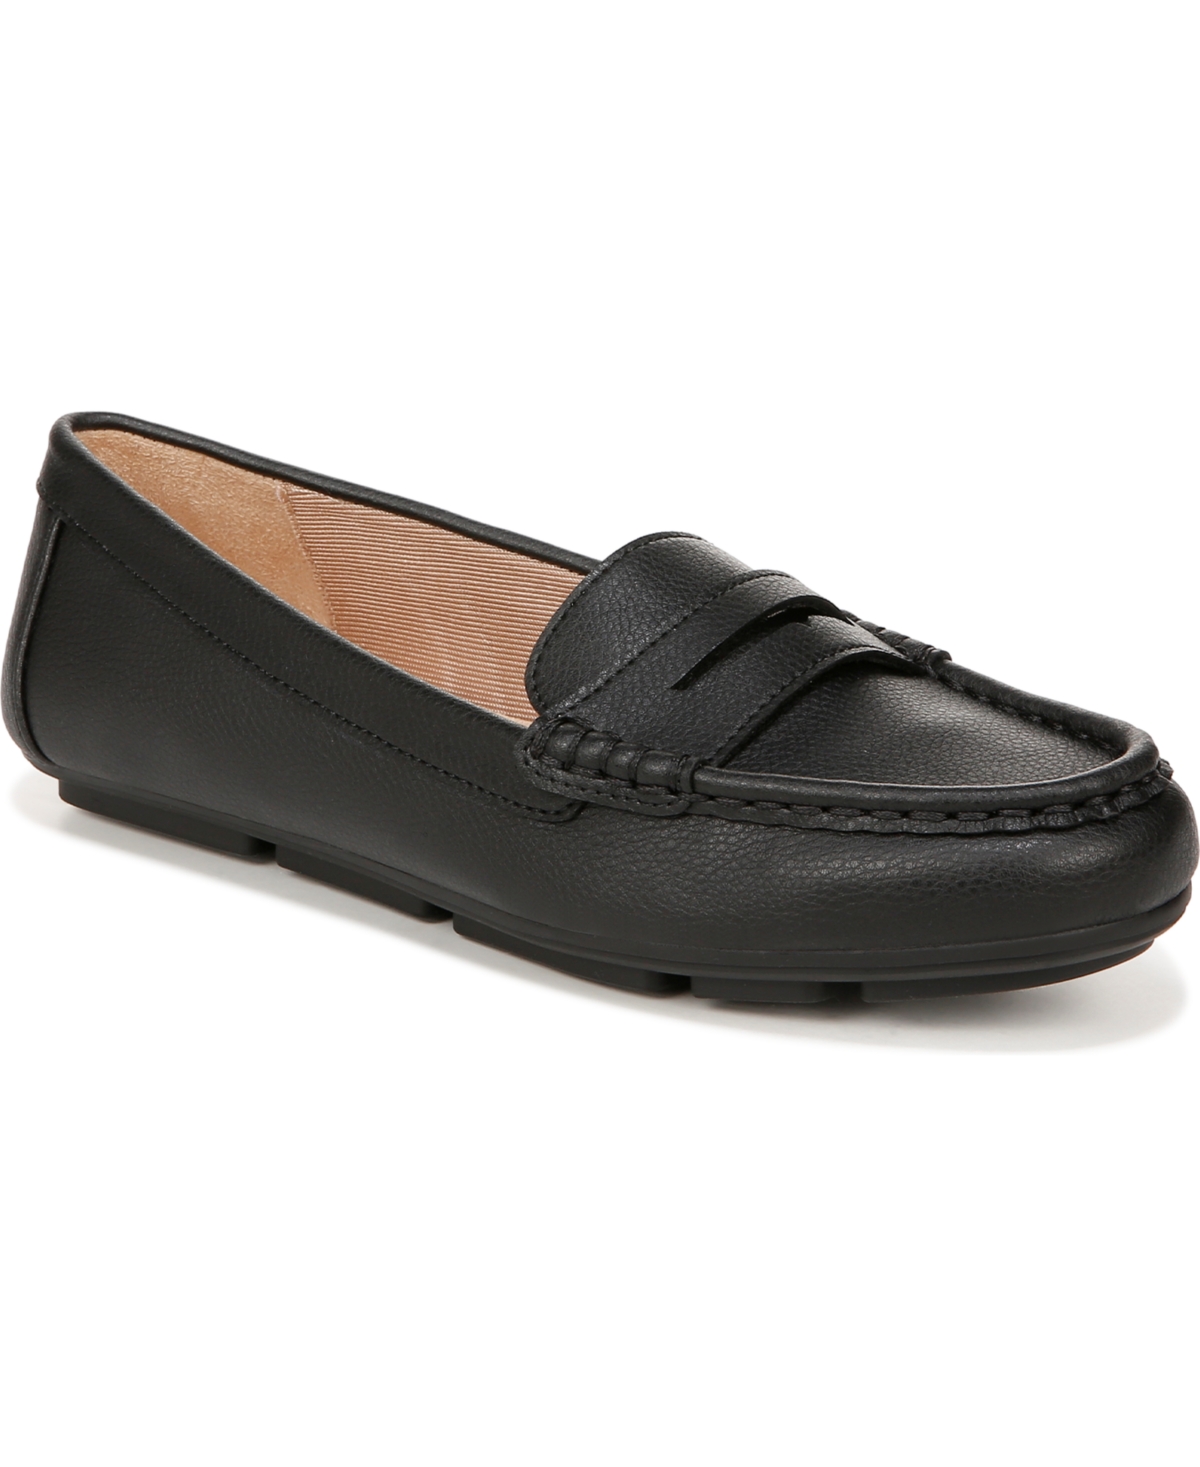 Lifestride Riviera Loafer In Black Faux Leather